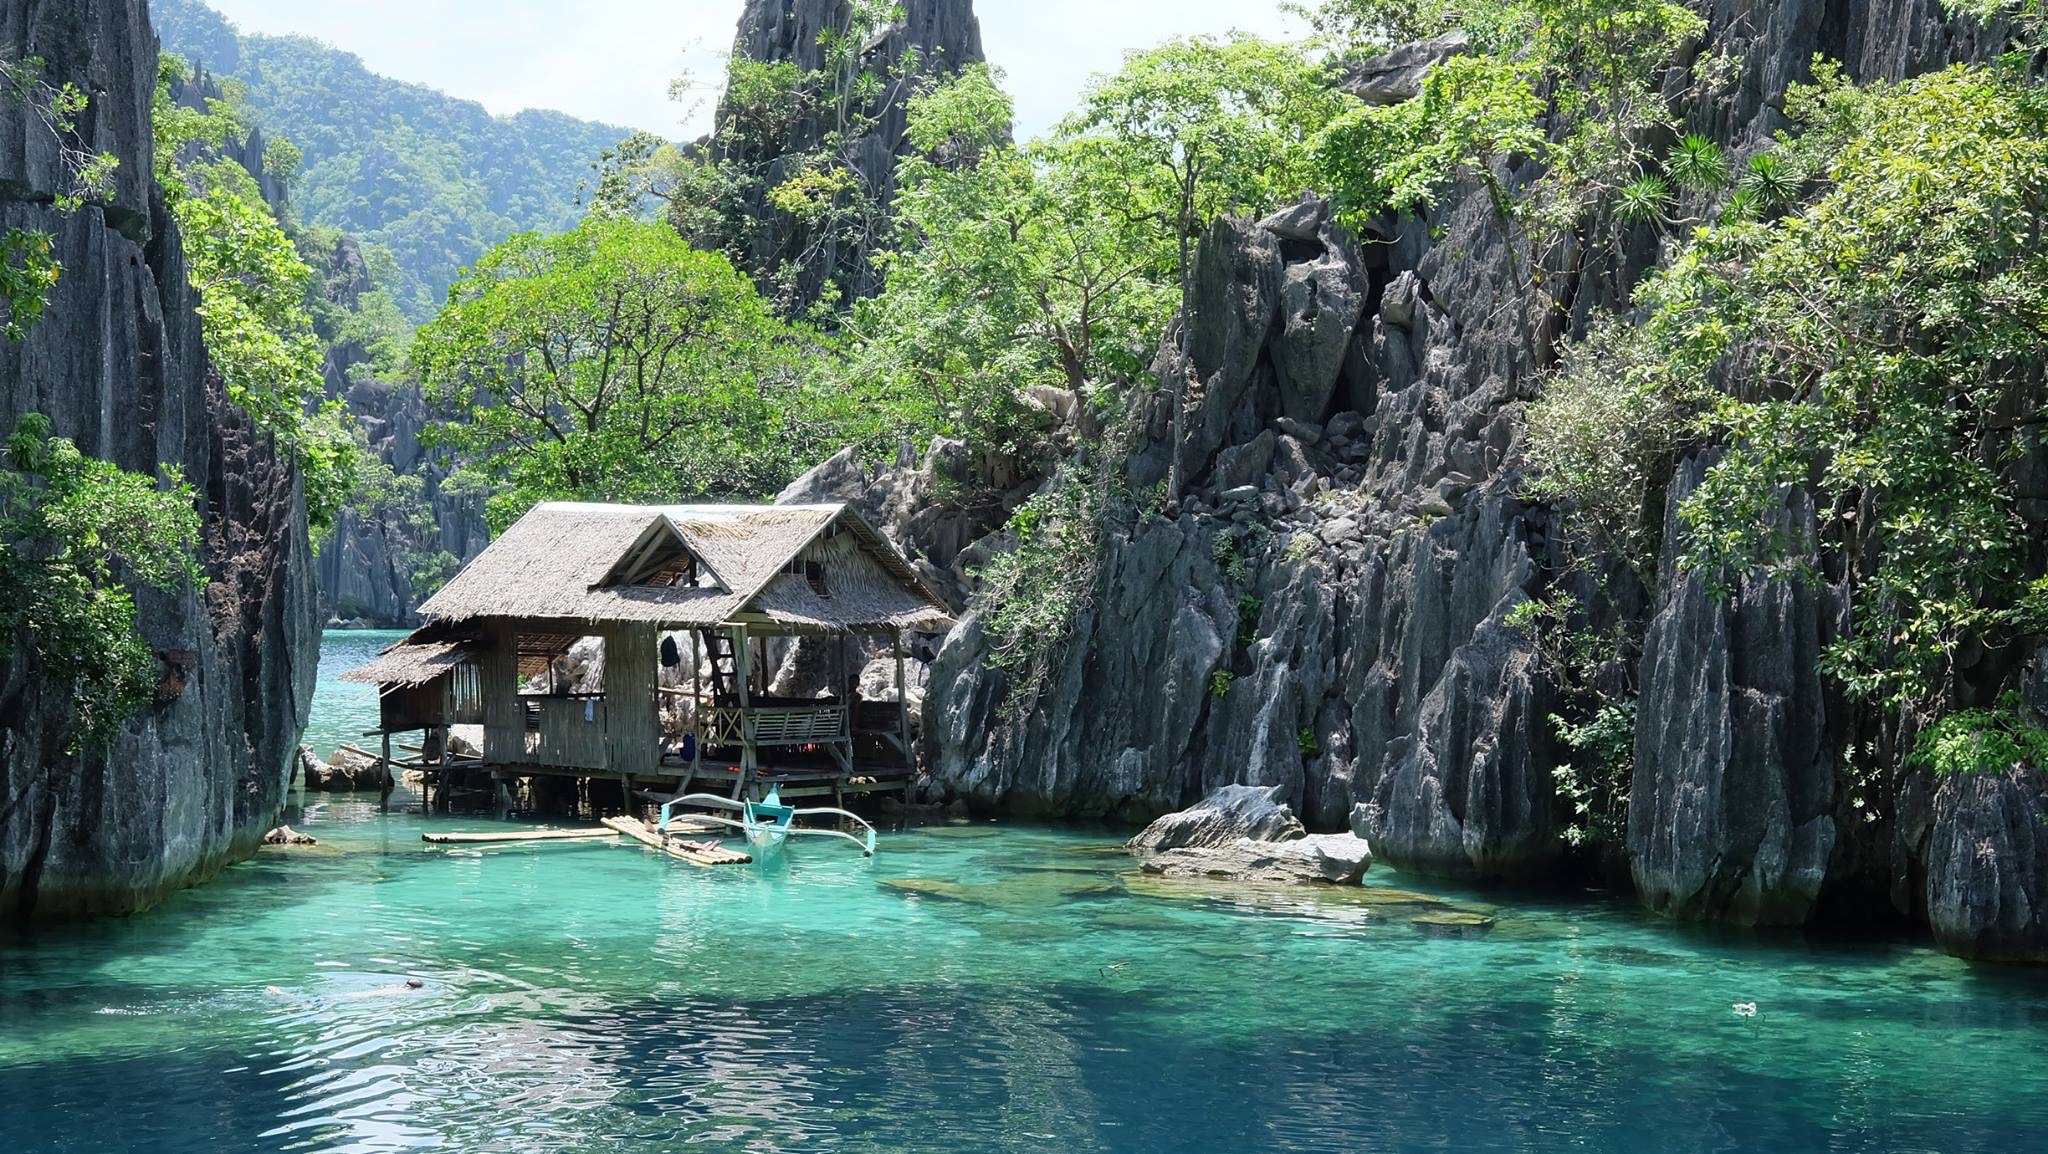 Where We Stayed in Coron, Palawan